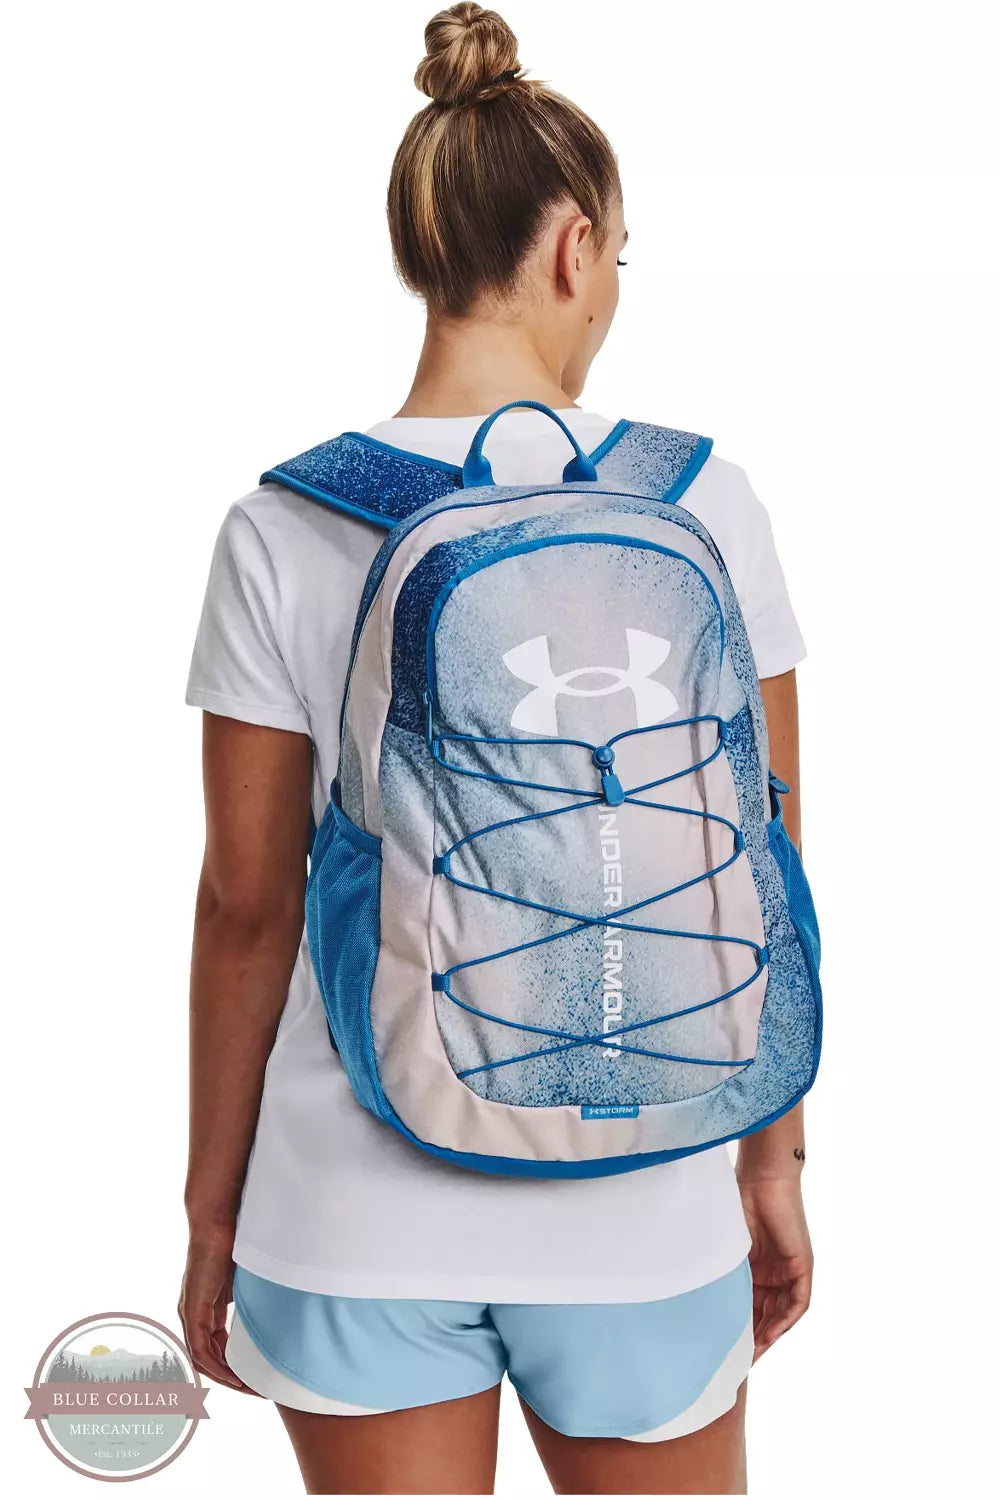 teal under armour backpack